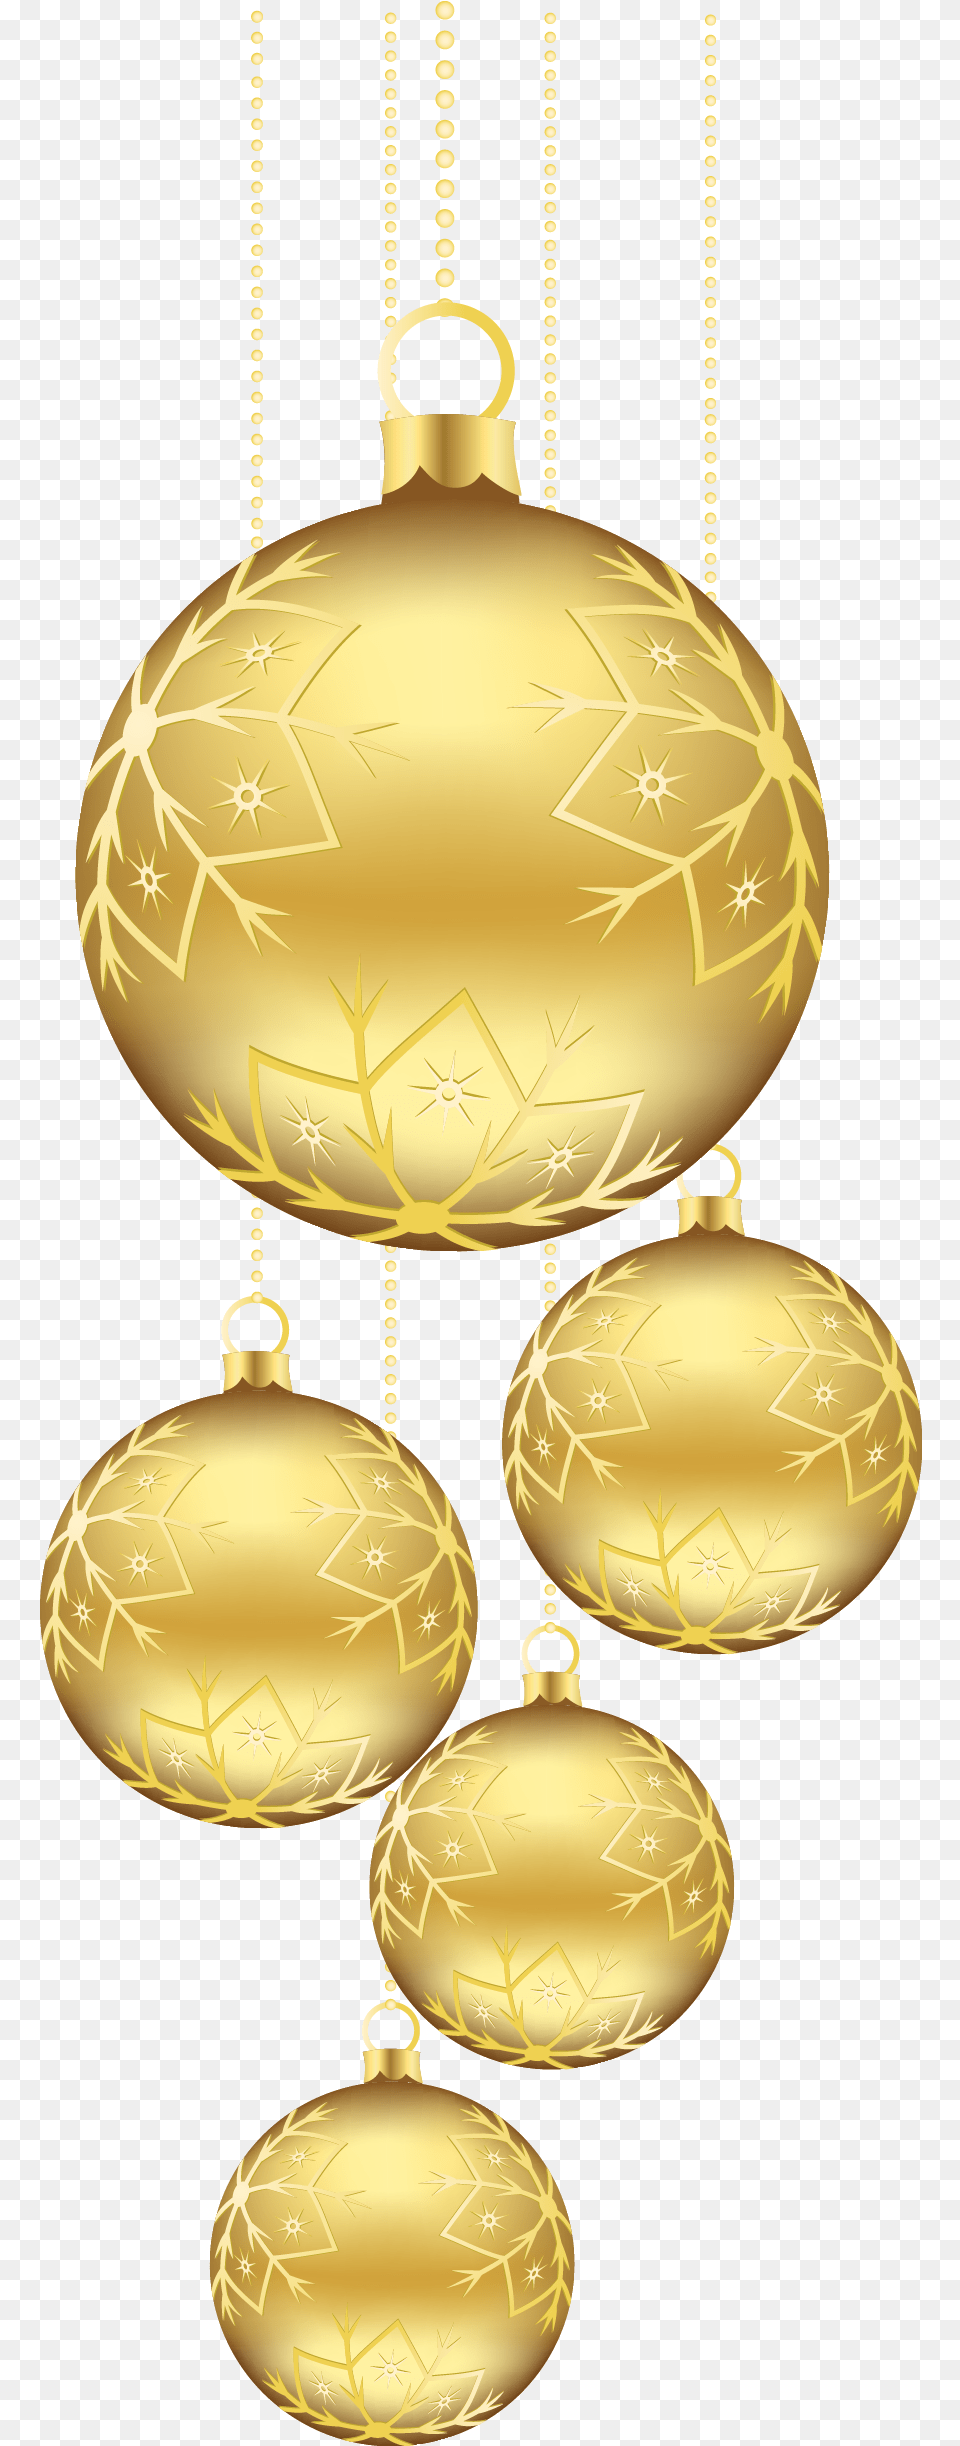 Christmas Balls Ornaments Transparent U0026 Clipart Free Christmas Decorations Gold, Accessories, Chandelier, Lamp Png Image